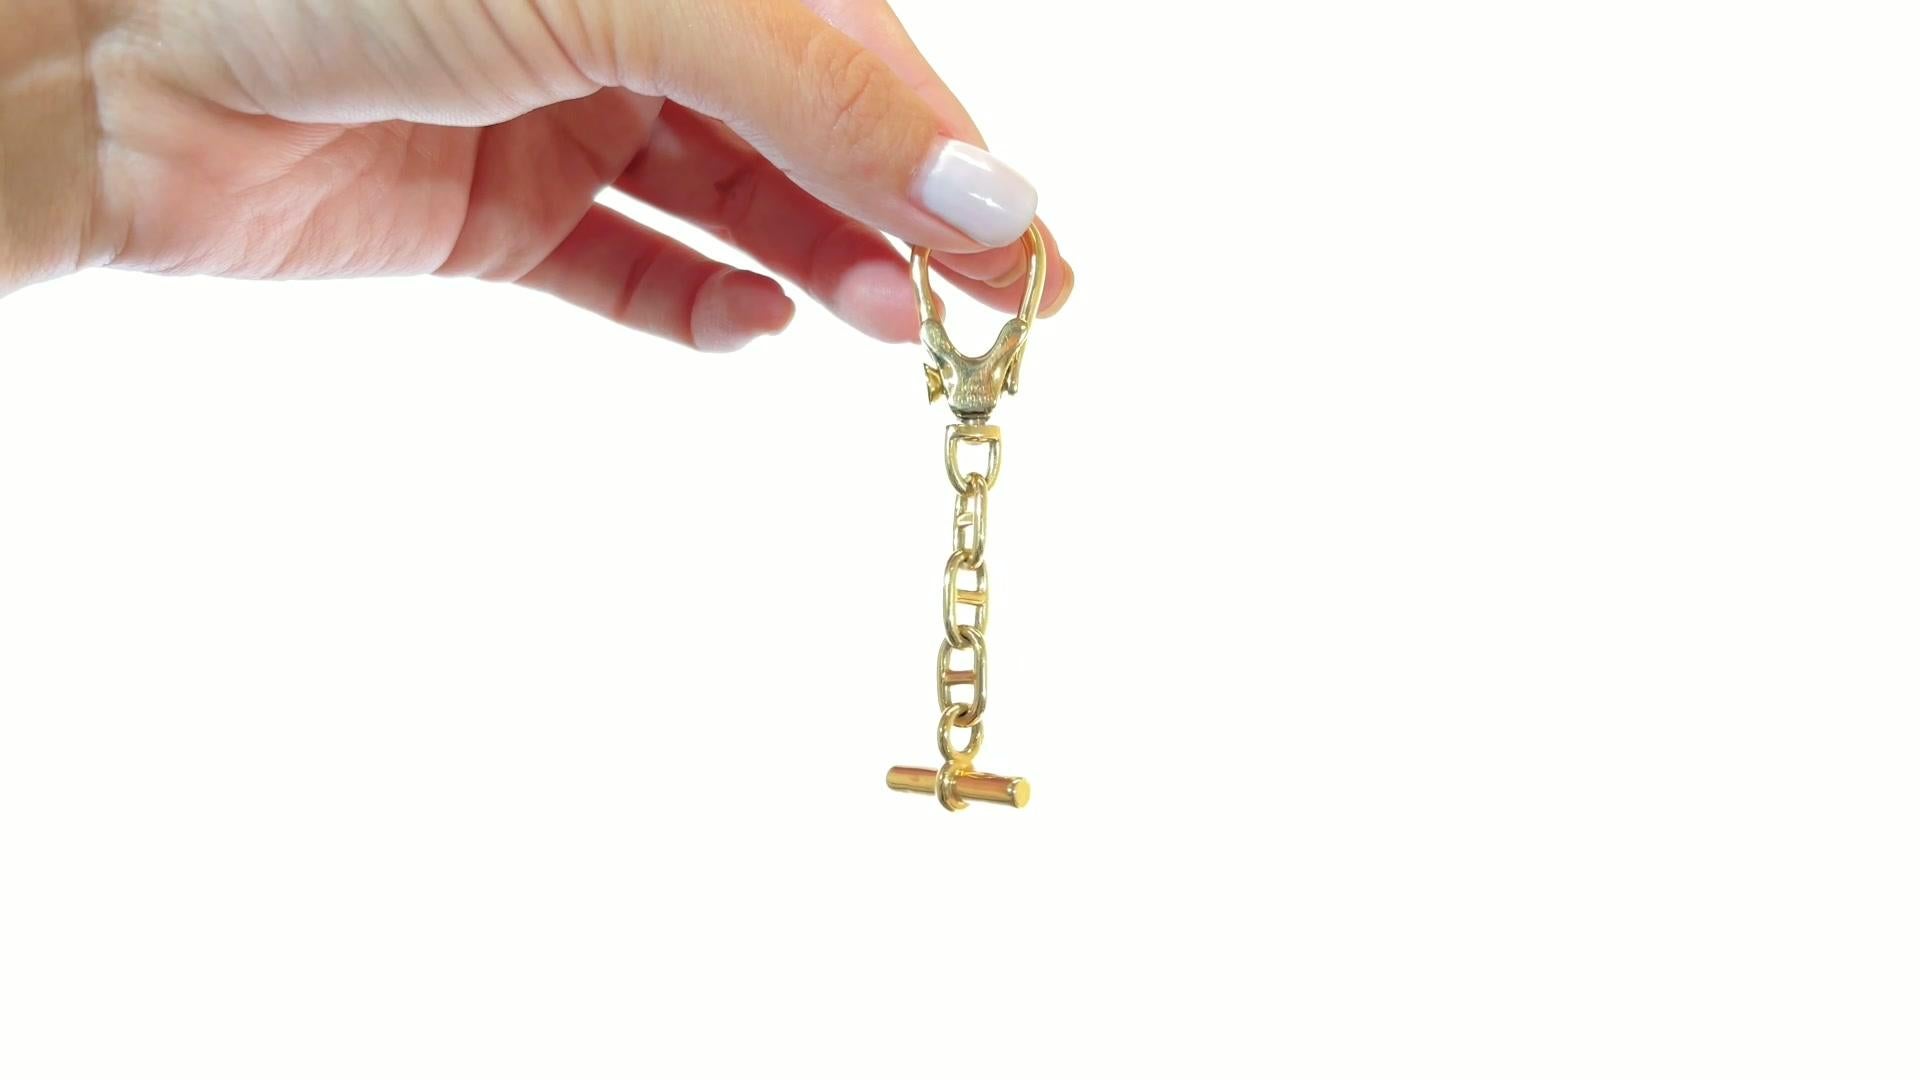 Vintage Hermes 18 Karat Gold Key Chain. Signed Hermes Paris. Circa 1960s. The length is 3 inches. 

About The Piece: Feel luxurious and important in every way. Own a piece of luxury made by this iconic designer. 

Flawless Protection Plan: 
-7-day